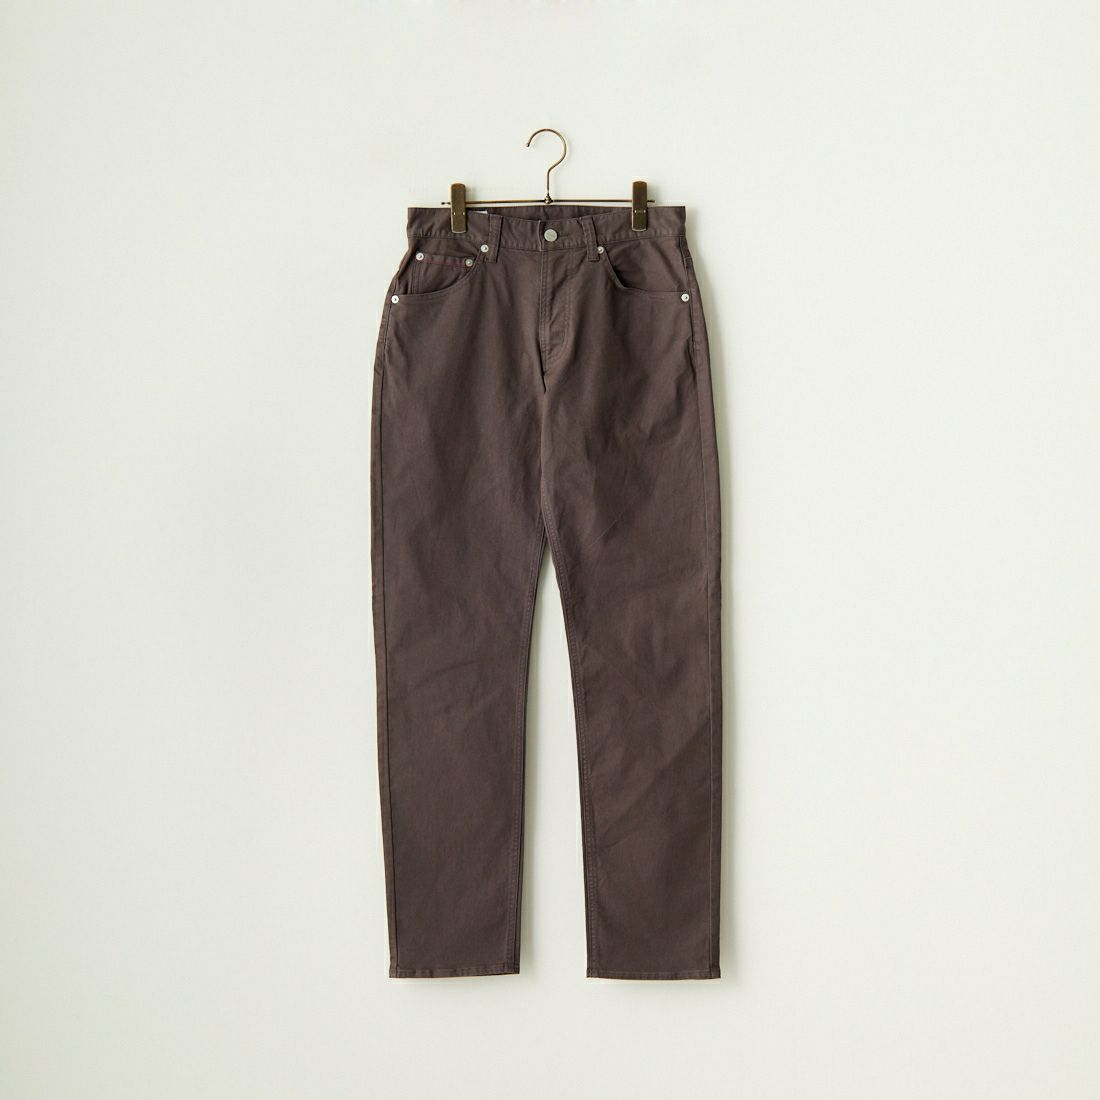 Jeans Factory Clothes [ジーンズファクトリークローズ] STANDARD 8W